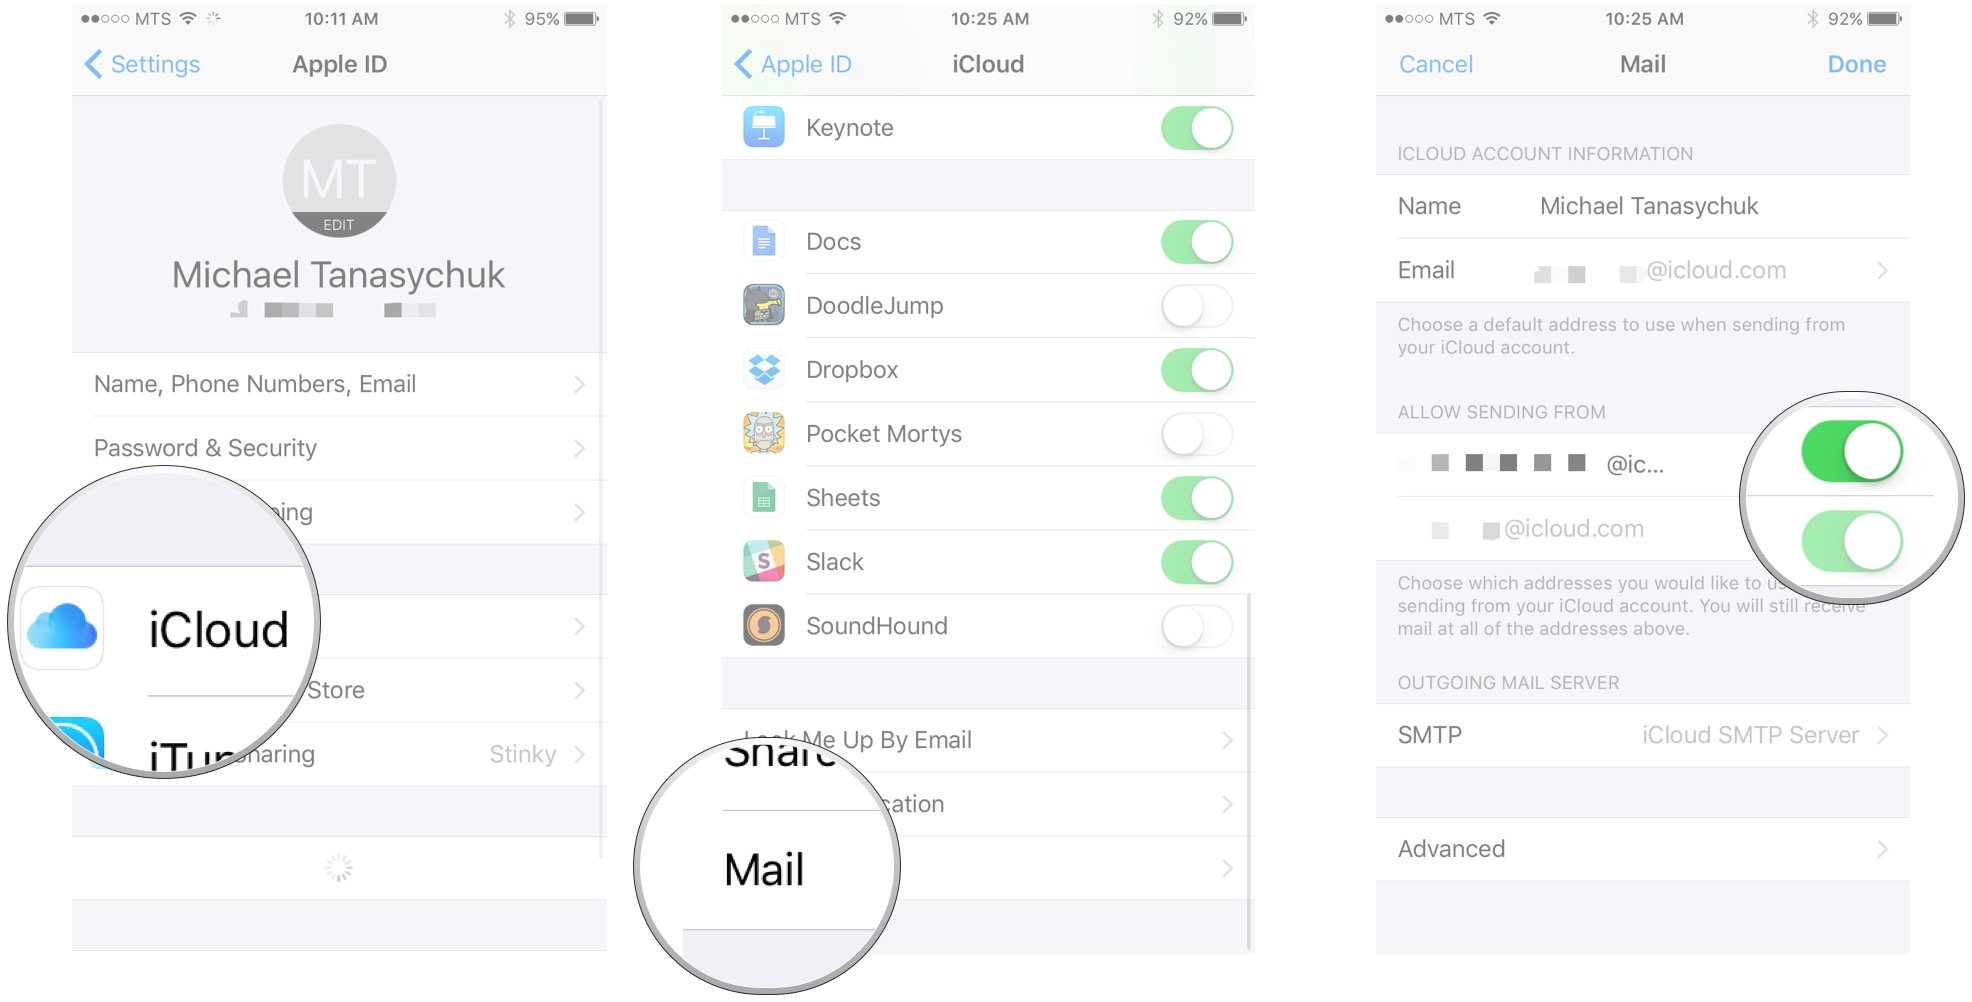 Tap the Apple ID banner, tap iCloud, tap Mail, tap the switches